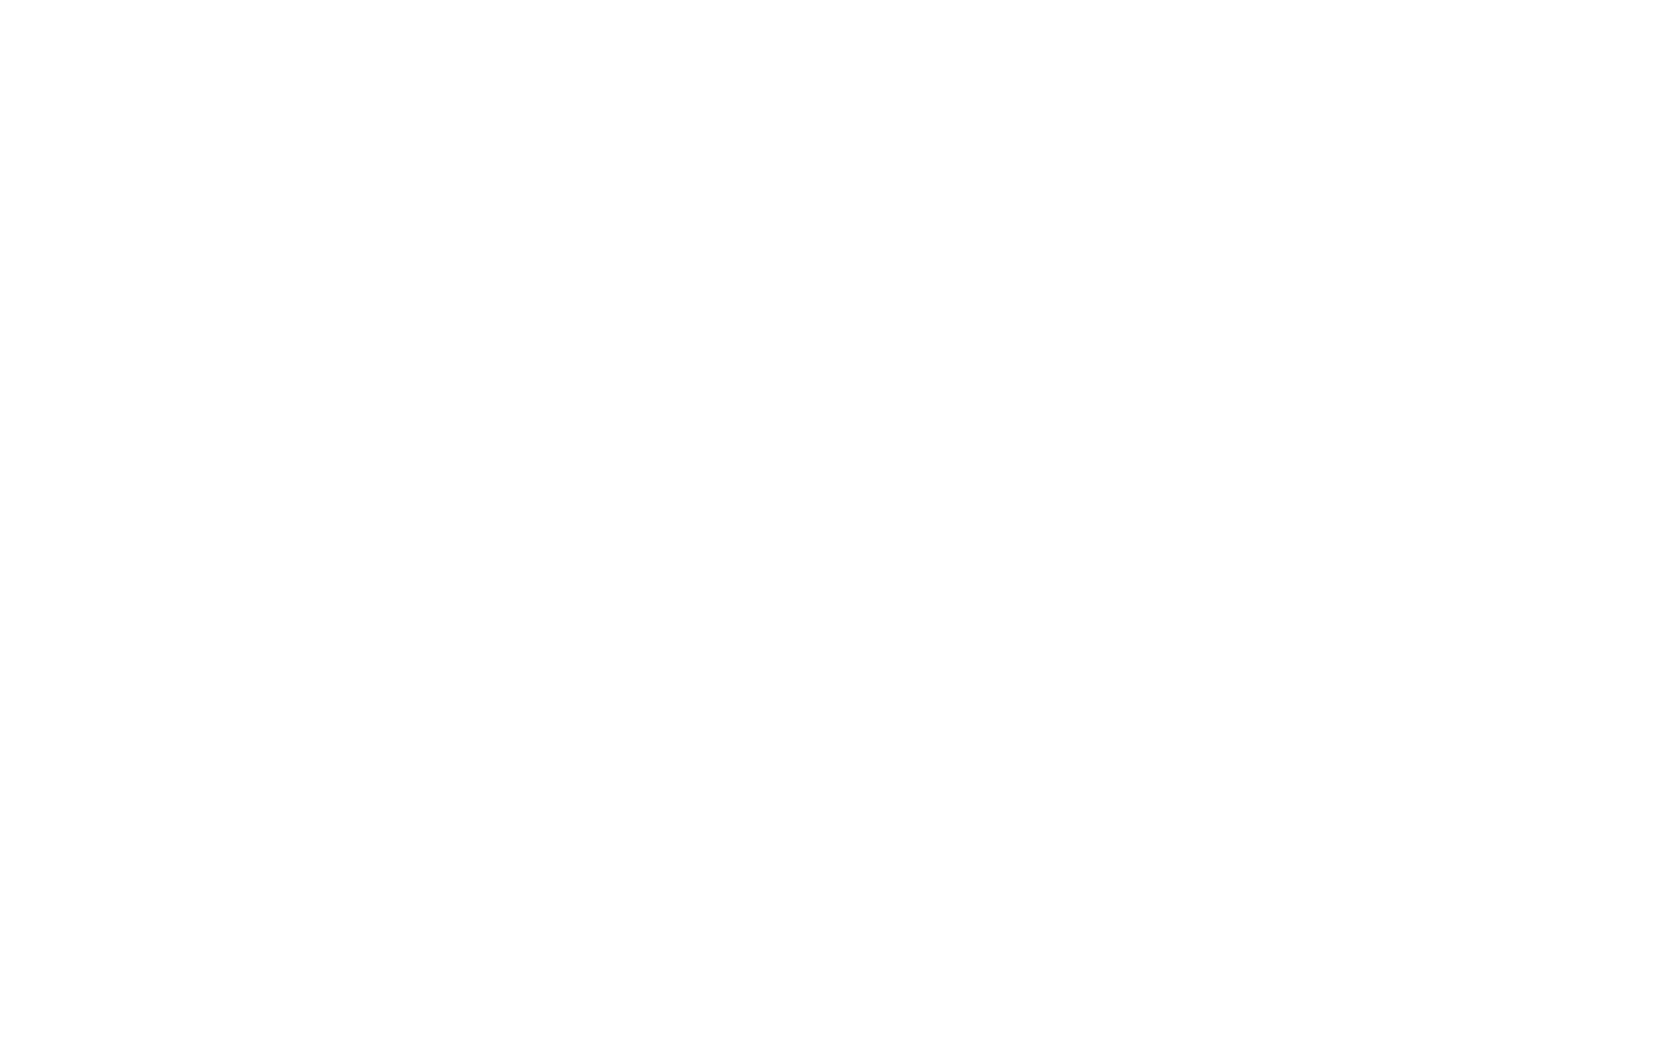 Pelican Products